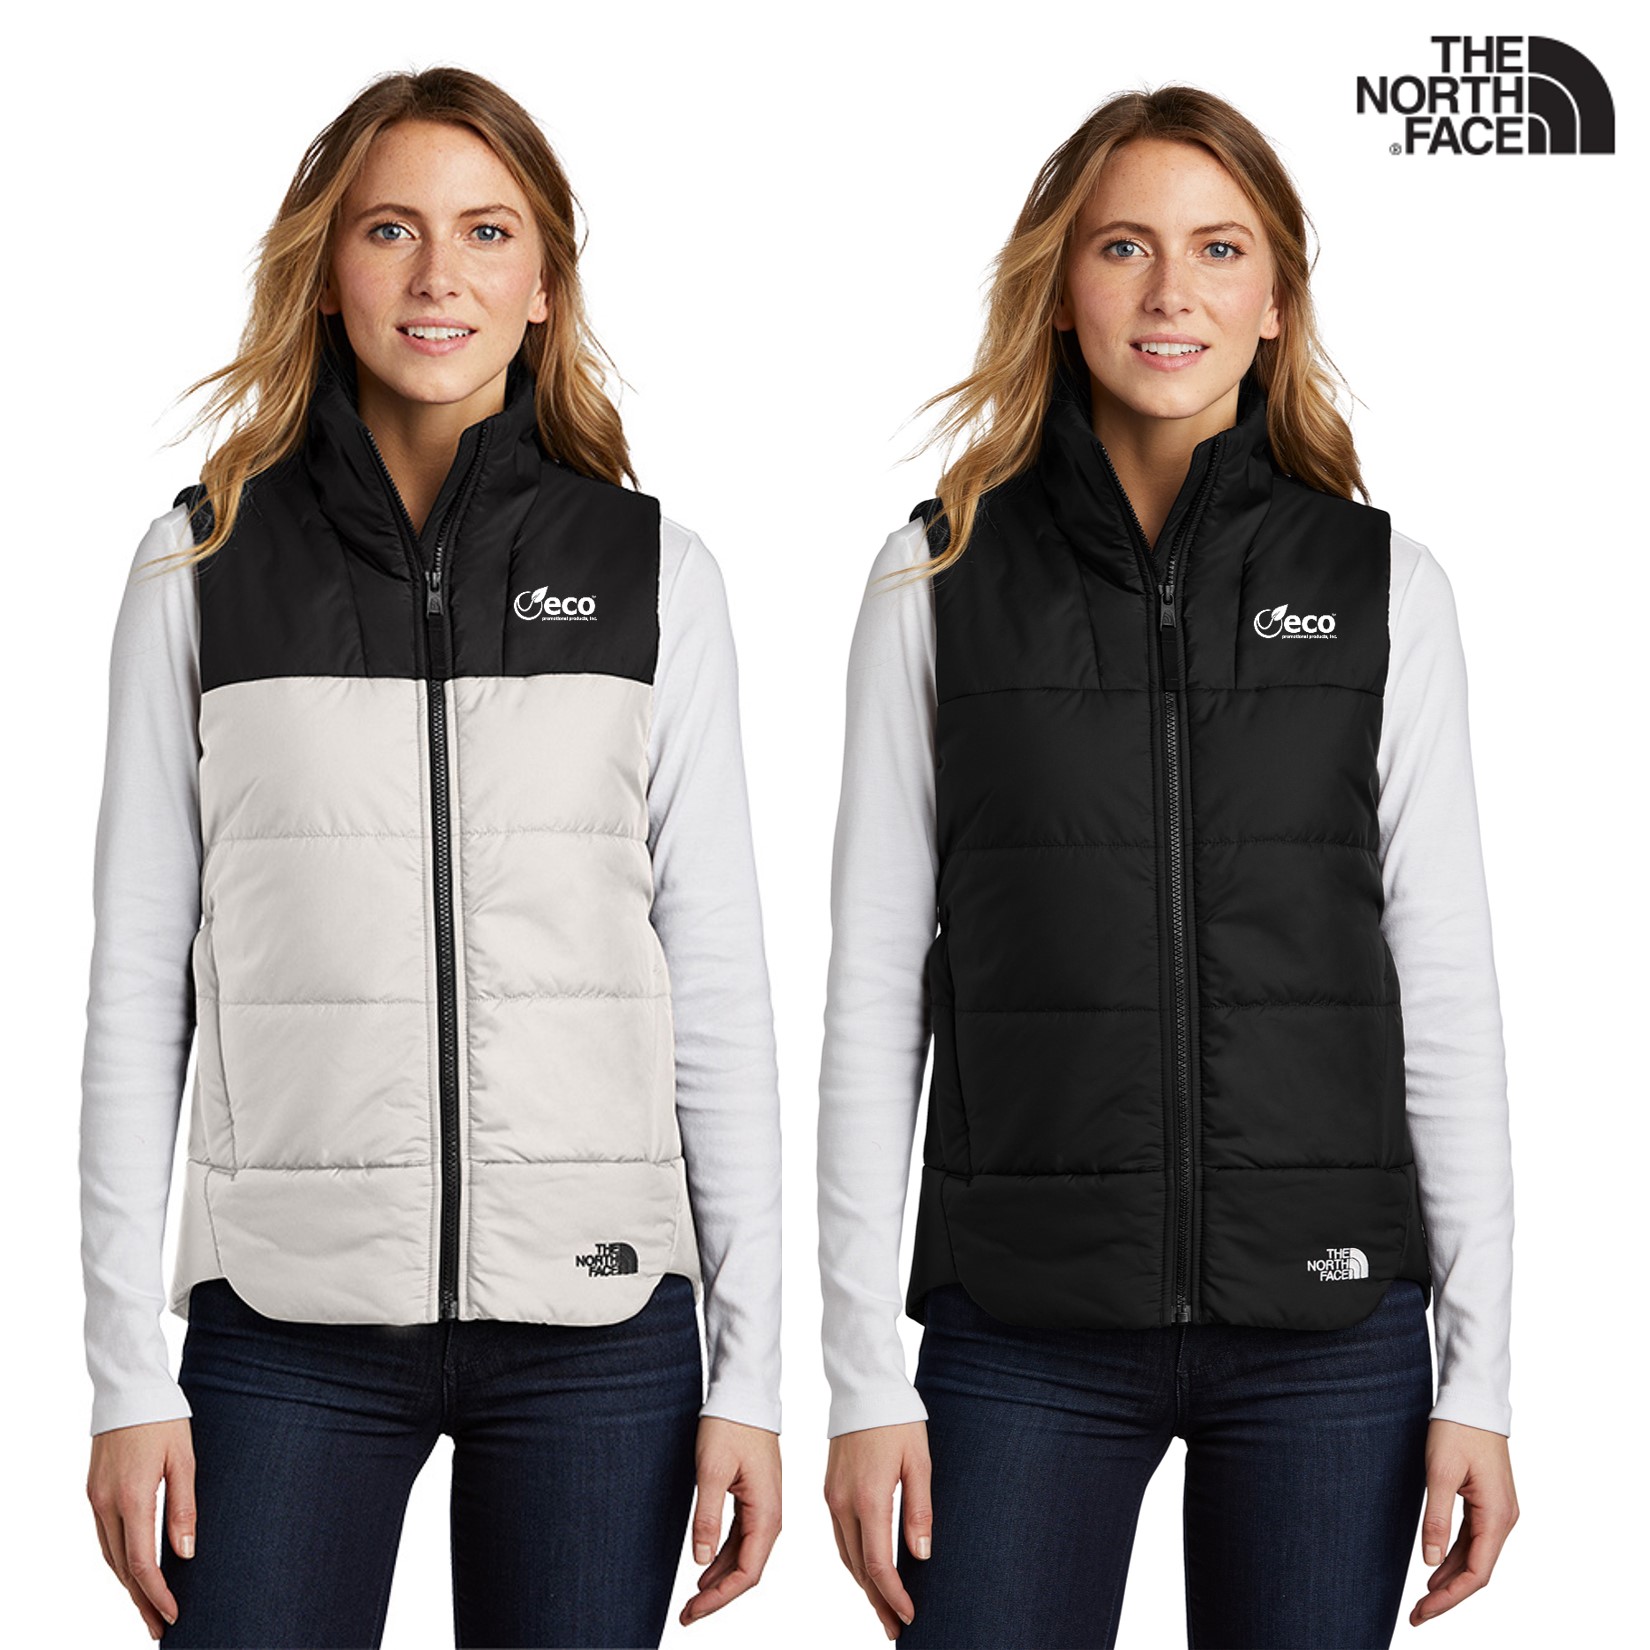 The North Face Eco Promotions Recycled Custom Vest